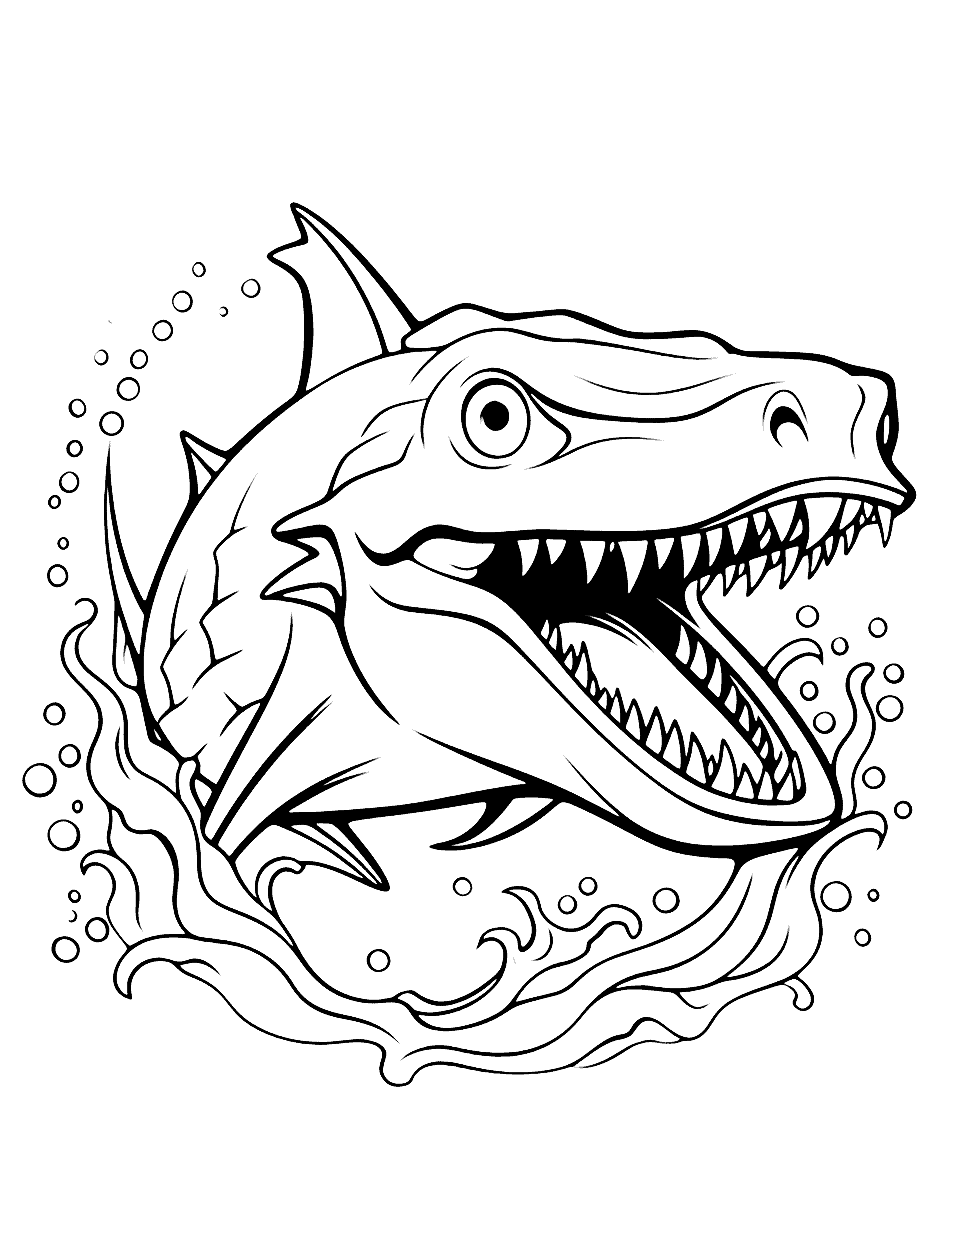 Hybrid Shark-Dragon Shark Coloring Page - An imaginary hybrid of a shark and a dragon, breathing underwater fire.